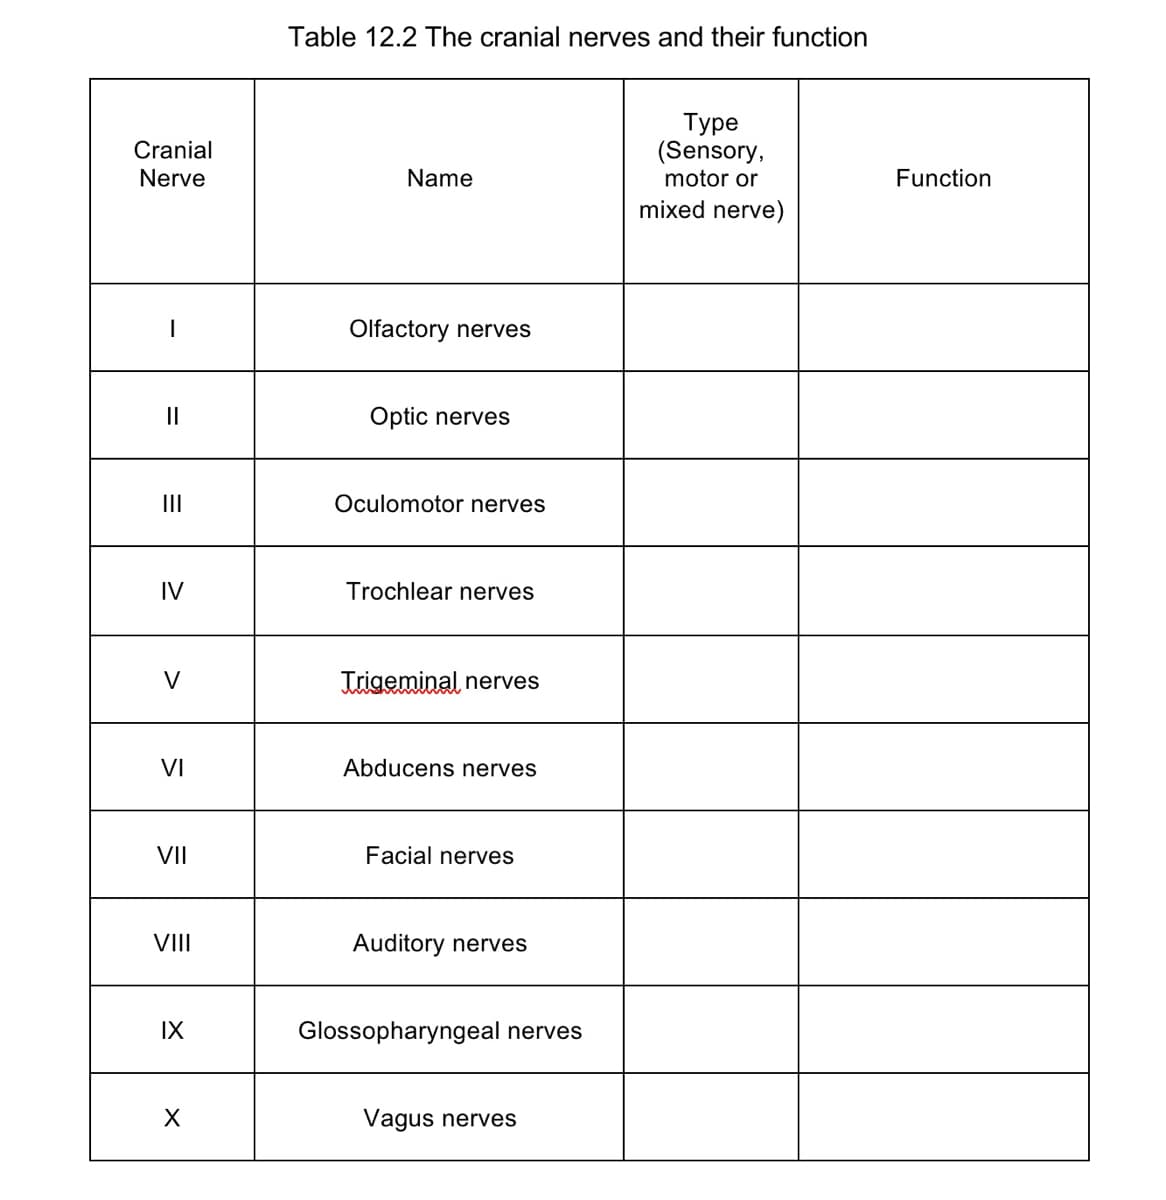 Table 12.2 The cranial nerves and their function
Туре
(Sensory,
motor or
Cranial
Nerve
Name
Function
mixed nerve)
Olfactory nerves
II
Optic nerves
II
Oculomotor nerves
IV
Trochlear nerves
V
Trigeminal nerves
VI
Abducens nerves
VII
Facial nerves
VII
Auditory nerves
IX
Glossopharyngeal nerves
Vagus nerves
